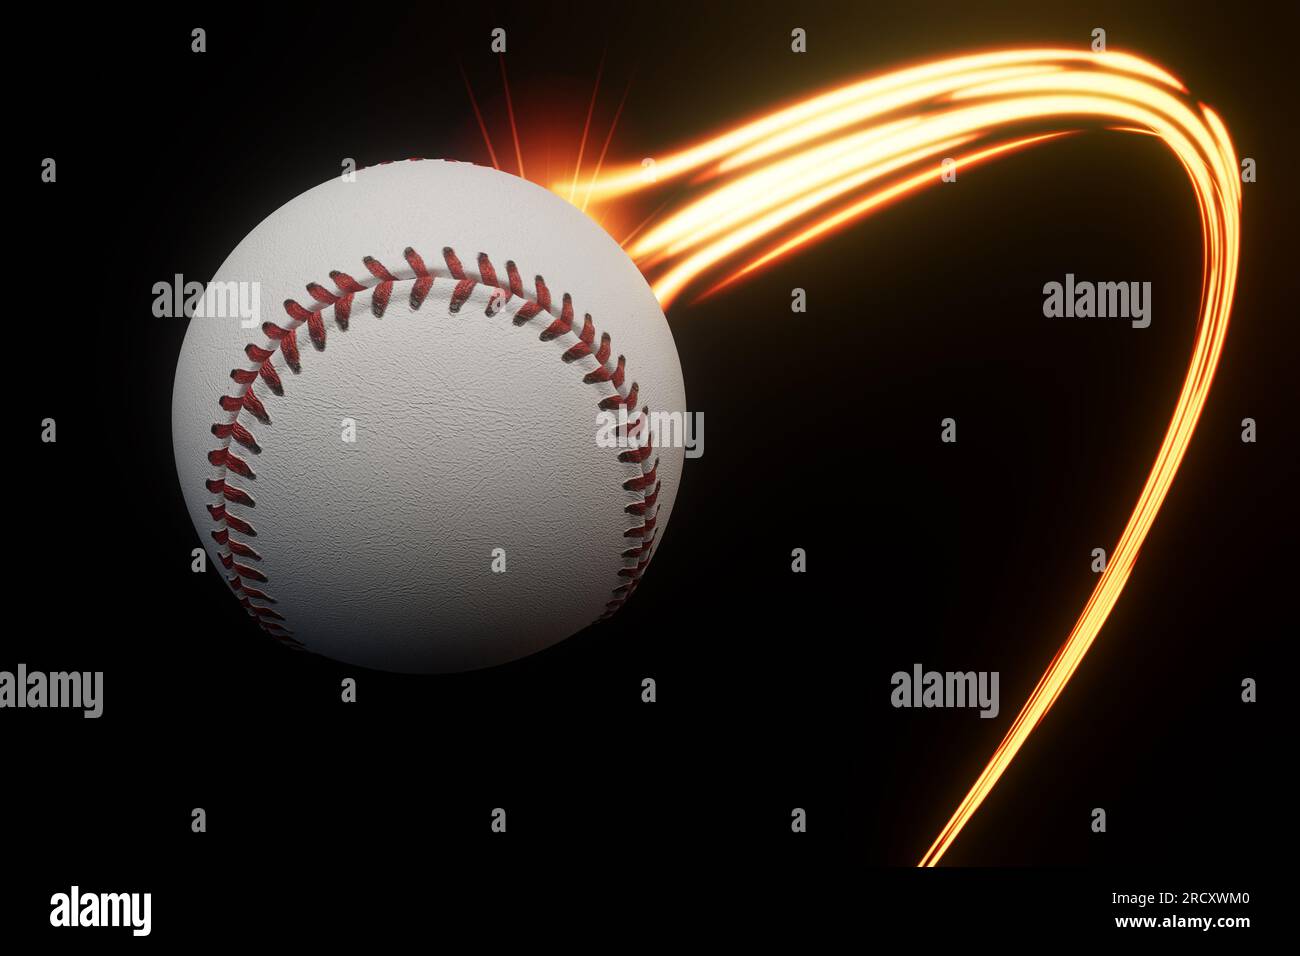 A baseball sport ball flying through the air with a flowing travelling trail of glowing wispy lights on an isolated background - 3D render Stock Photo